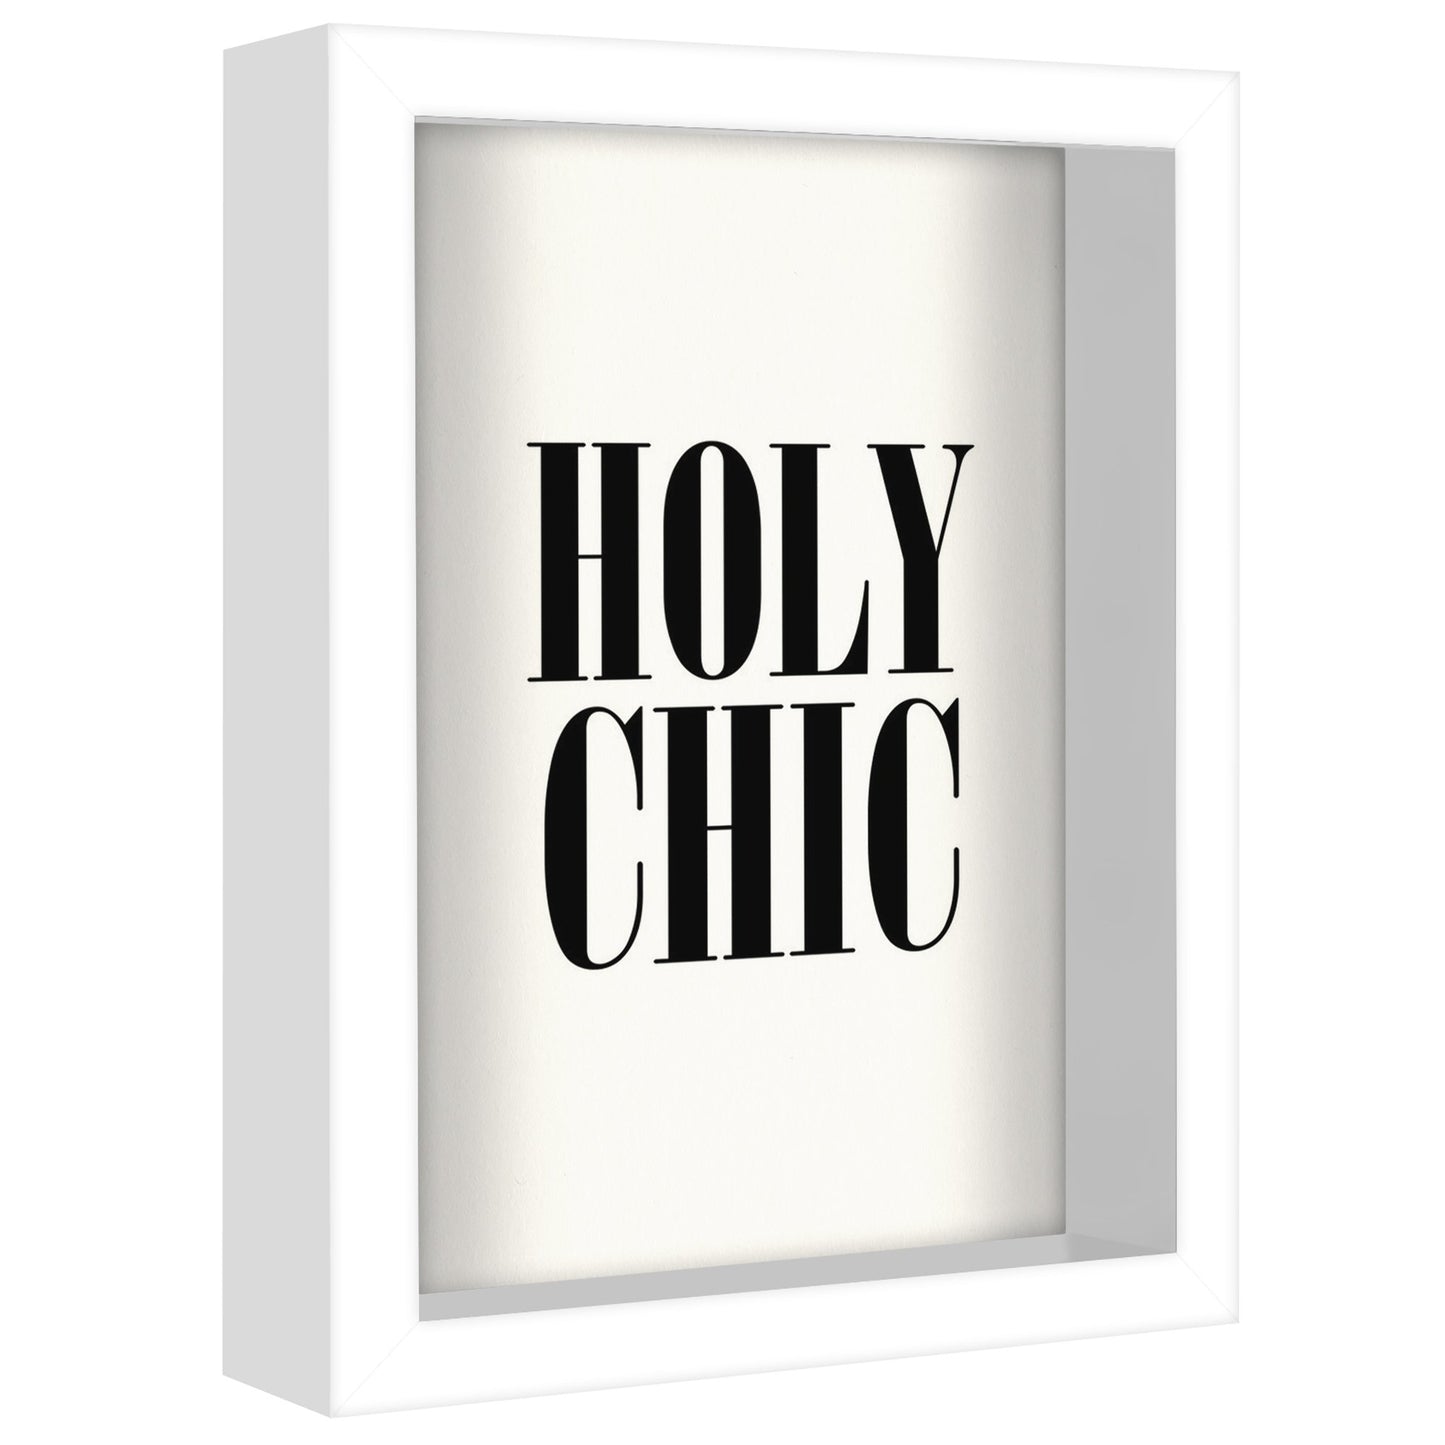 Holy Chic White By Motivated Type - Shadow Box Framed Art - Americanflat